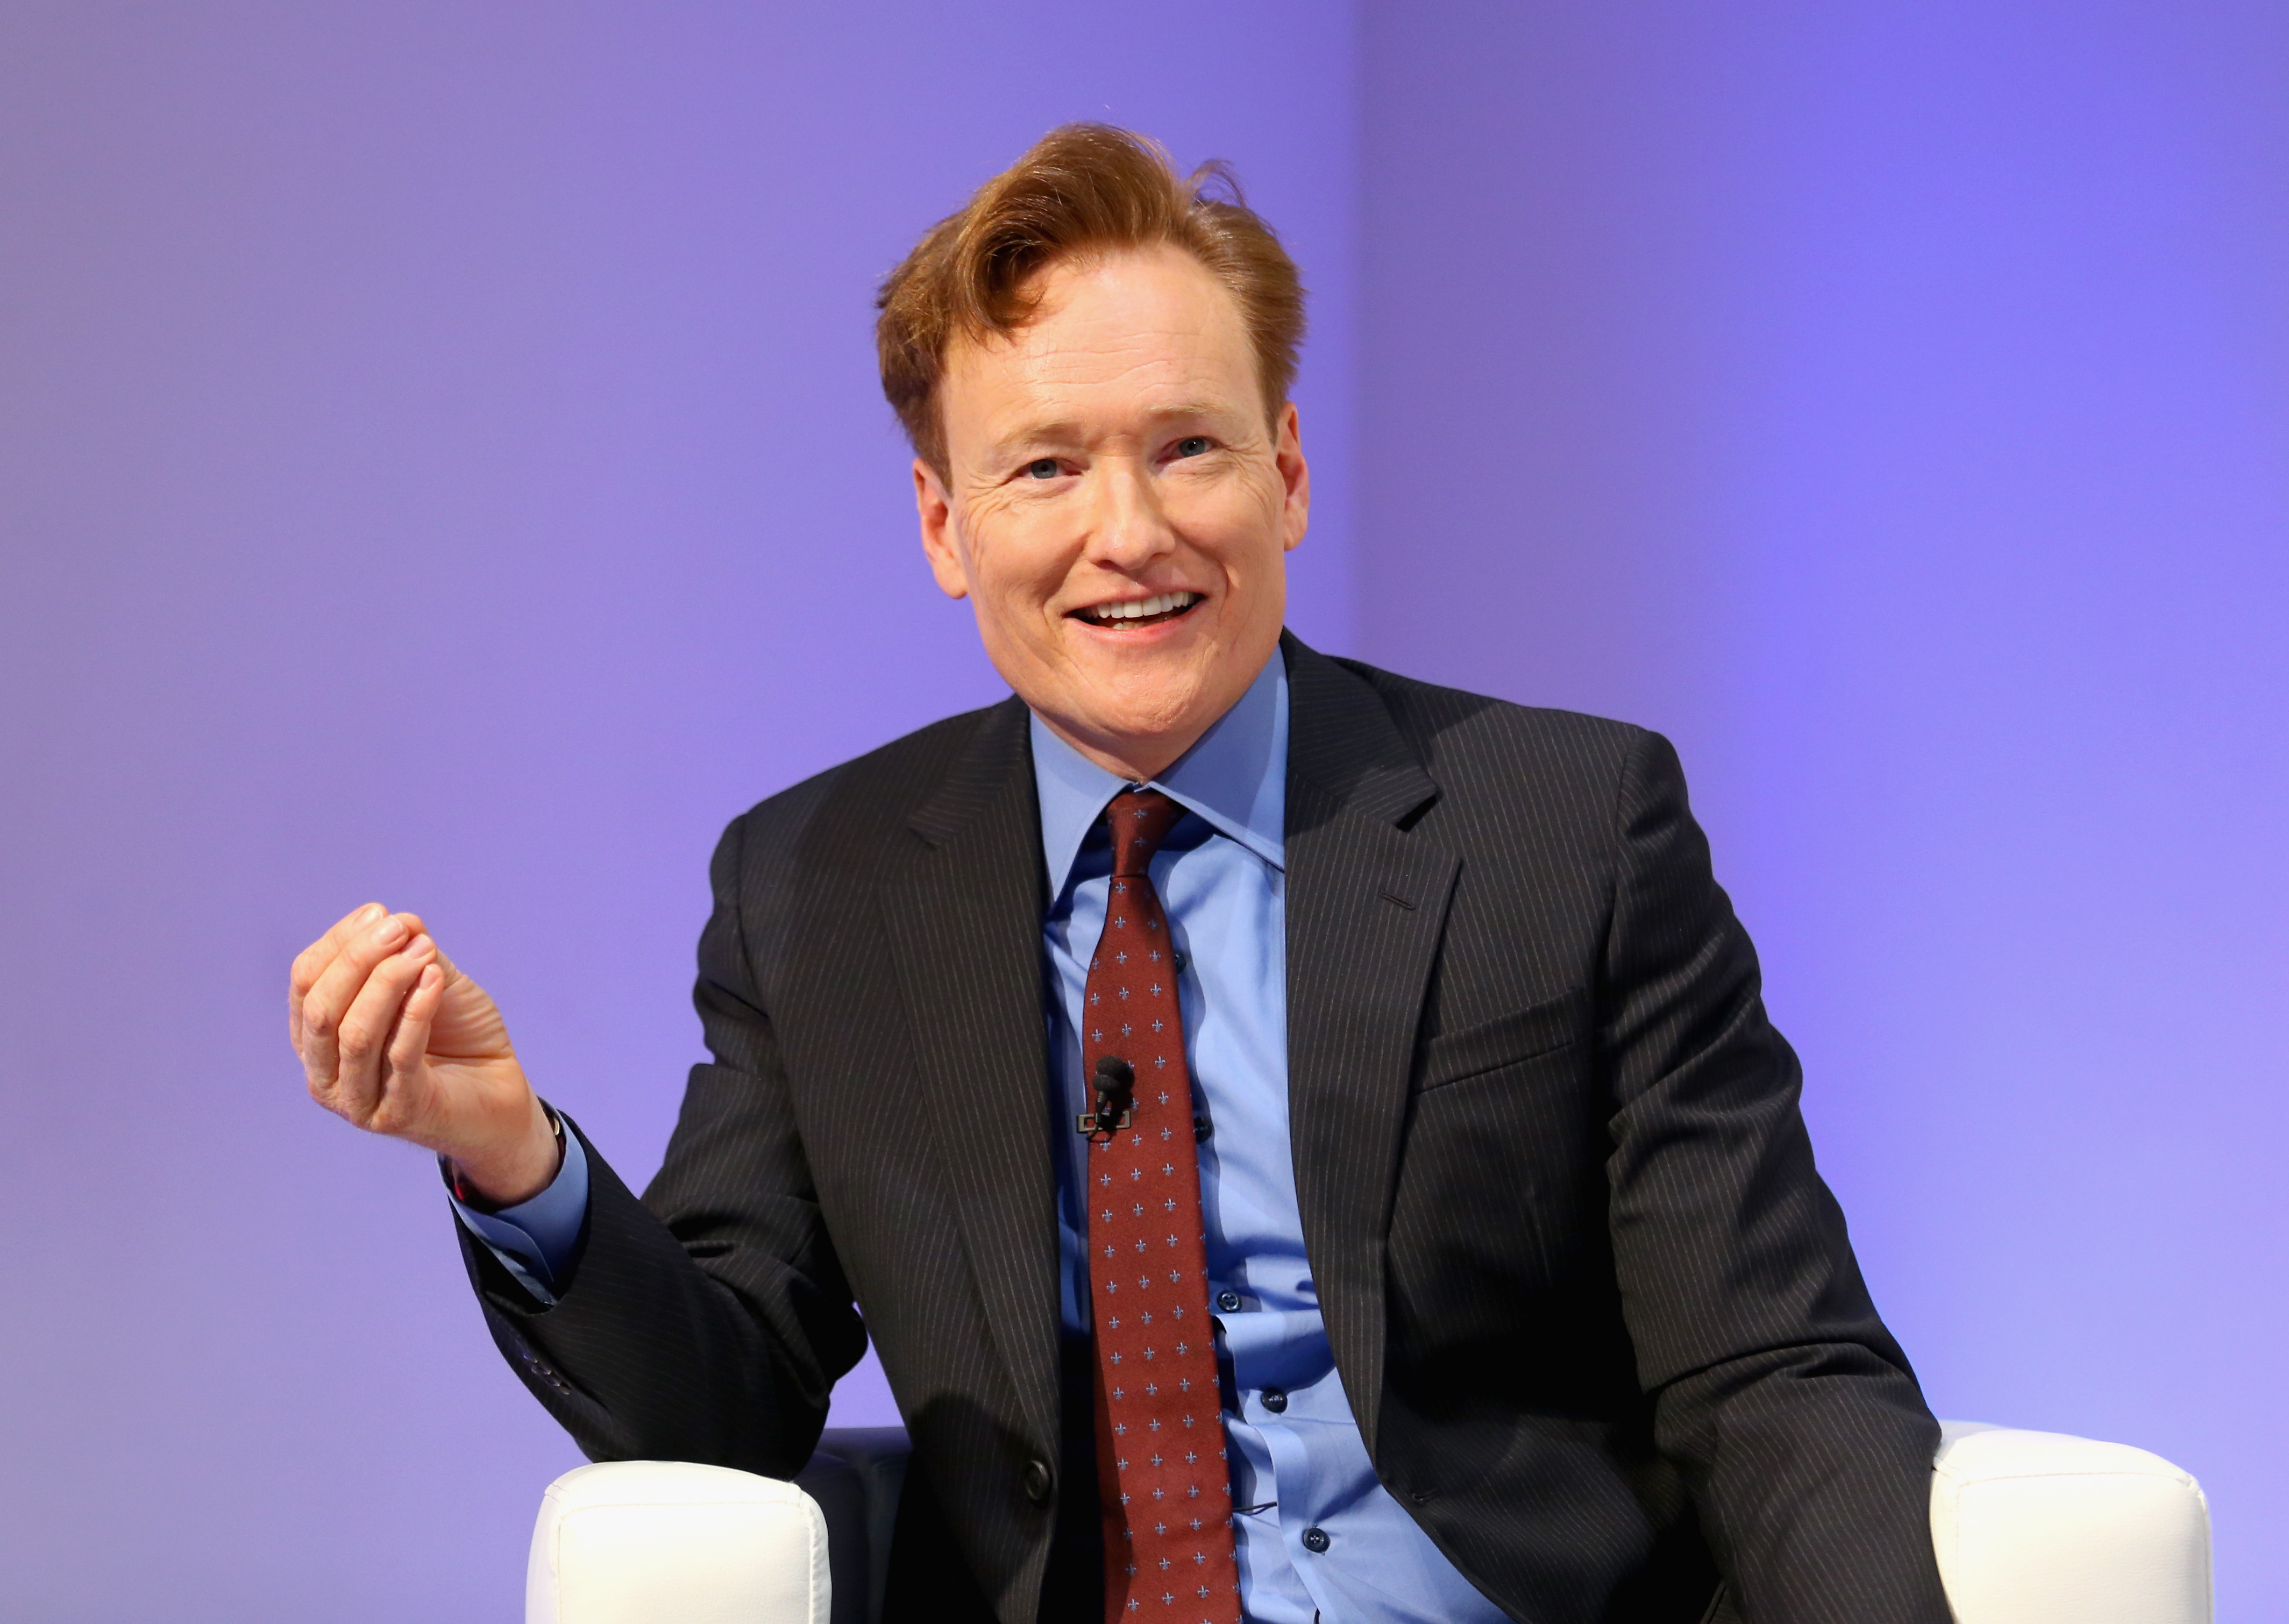 Conan O'Brien talks and gestures with one hand. He is sitting in a chair and wearing a blue shirt, red tie, and black jacket. 